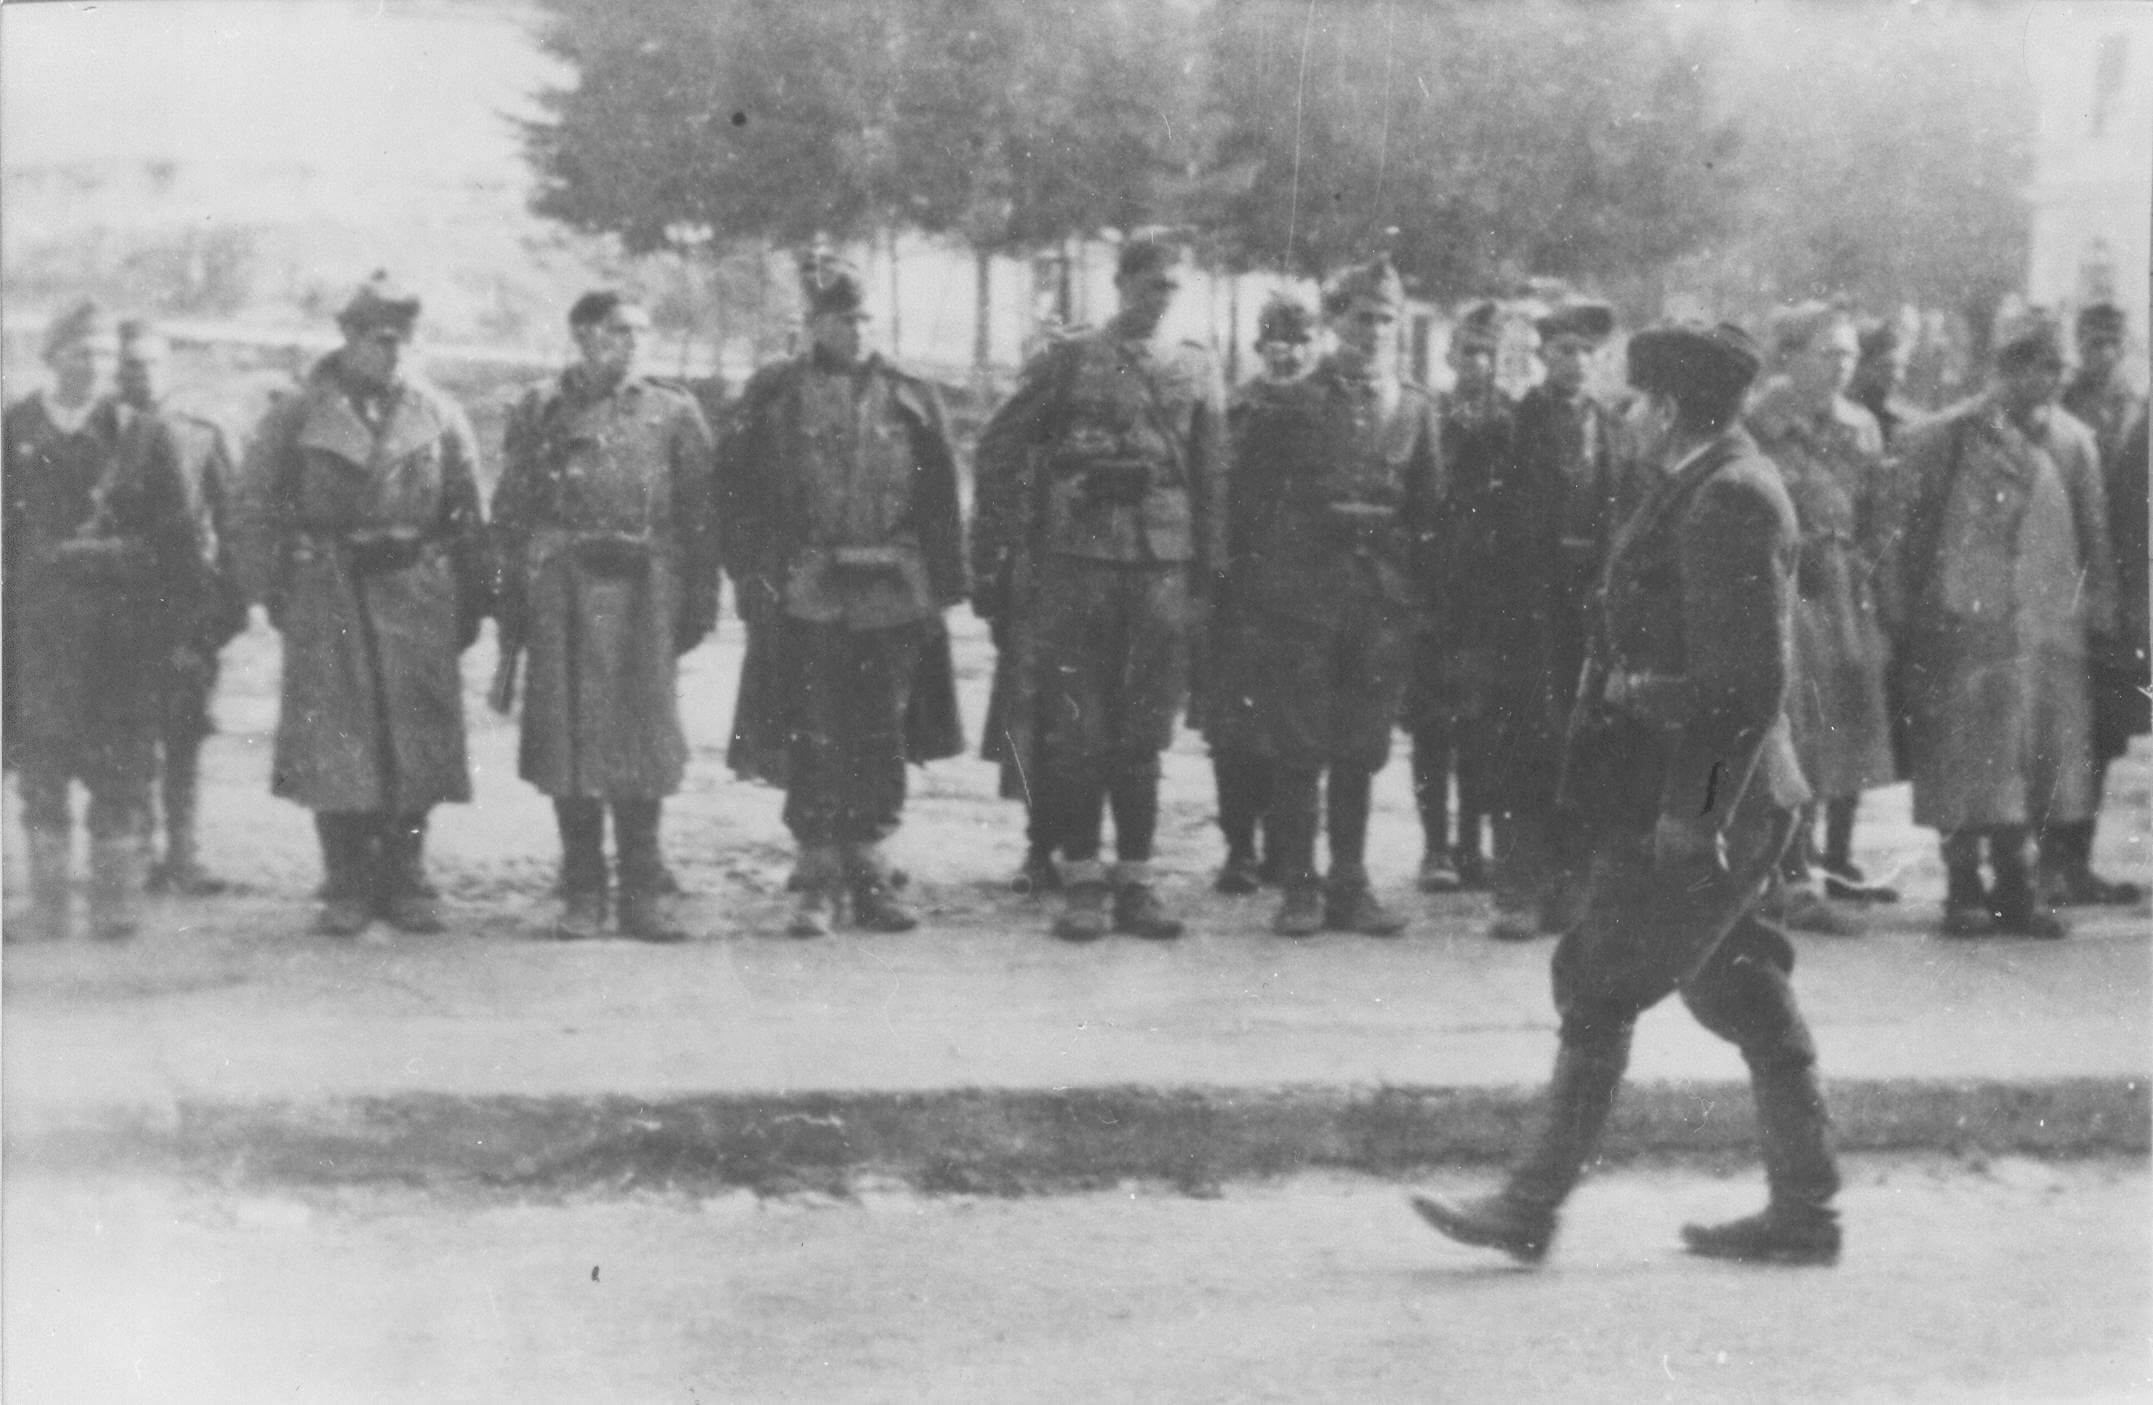 Josip Broz Tito conducts a review of one battalion of the 3rd Krajina Brigade after the battles for Bihac, in Bihac 1942.